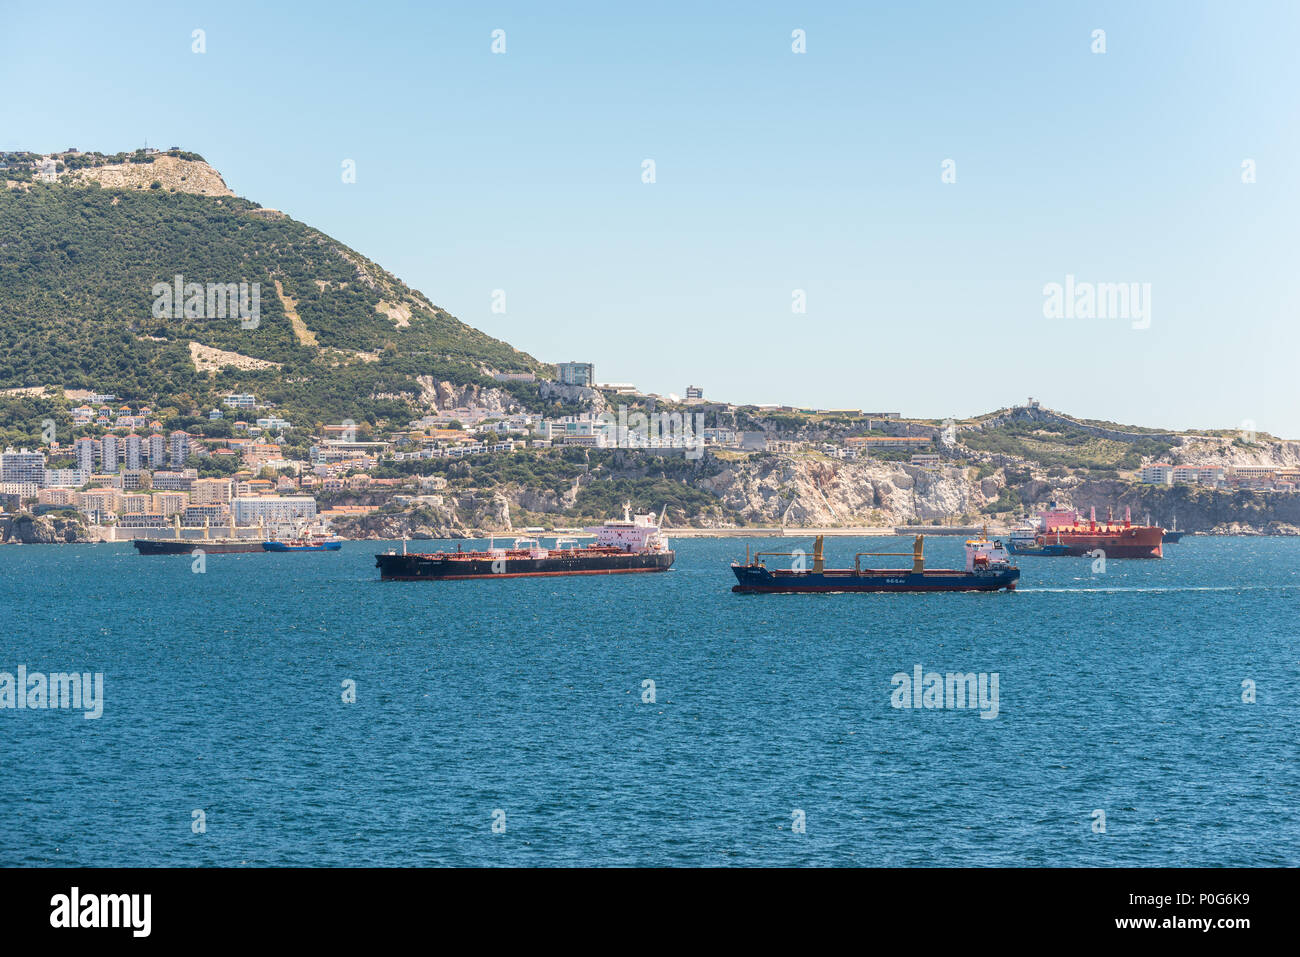 Gibraltar, UK - May 18, 2017: Cargo ships anchored in the roadstead of Gibraltar, United Kingdom, Western Europe. Stock Photo